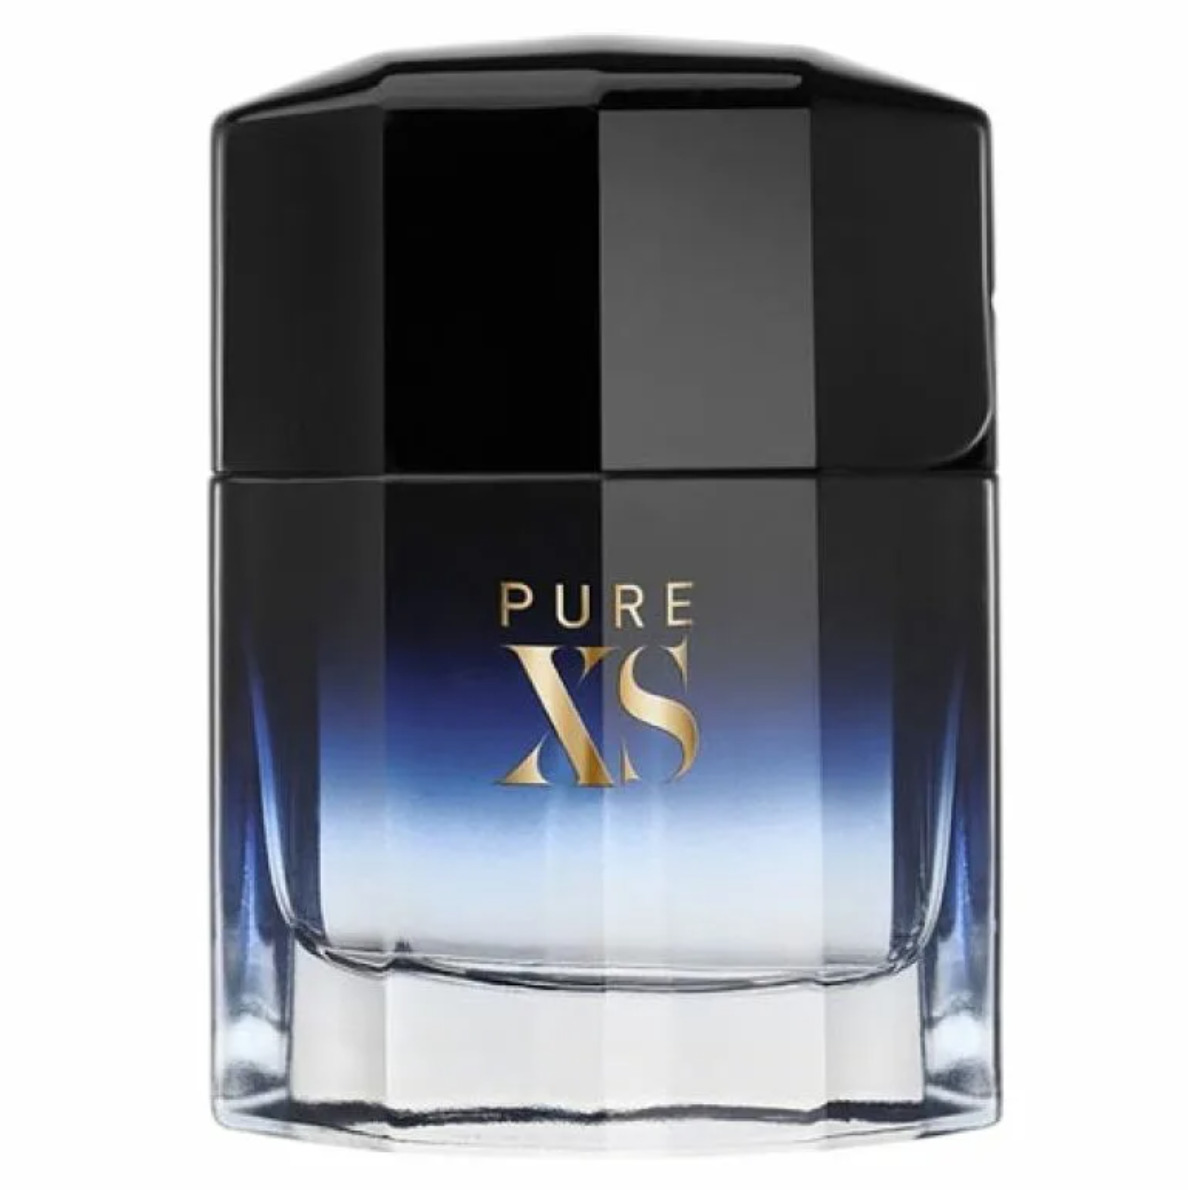 Paco Rabanne Pure XS for him. Paco Rabanne Pure XS мужской. Пако Рабан XS духи мужские Pure. Paco Rabanne XS туалетная вода 100 мл. Недорогая мужская туалетная вода